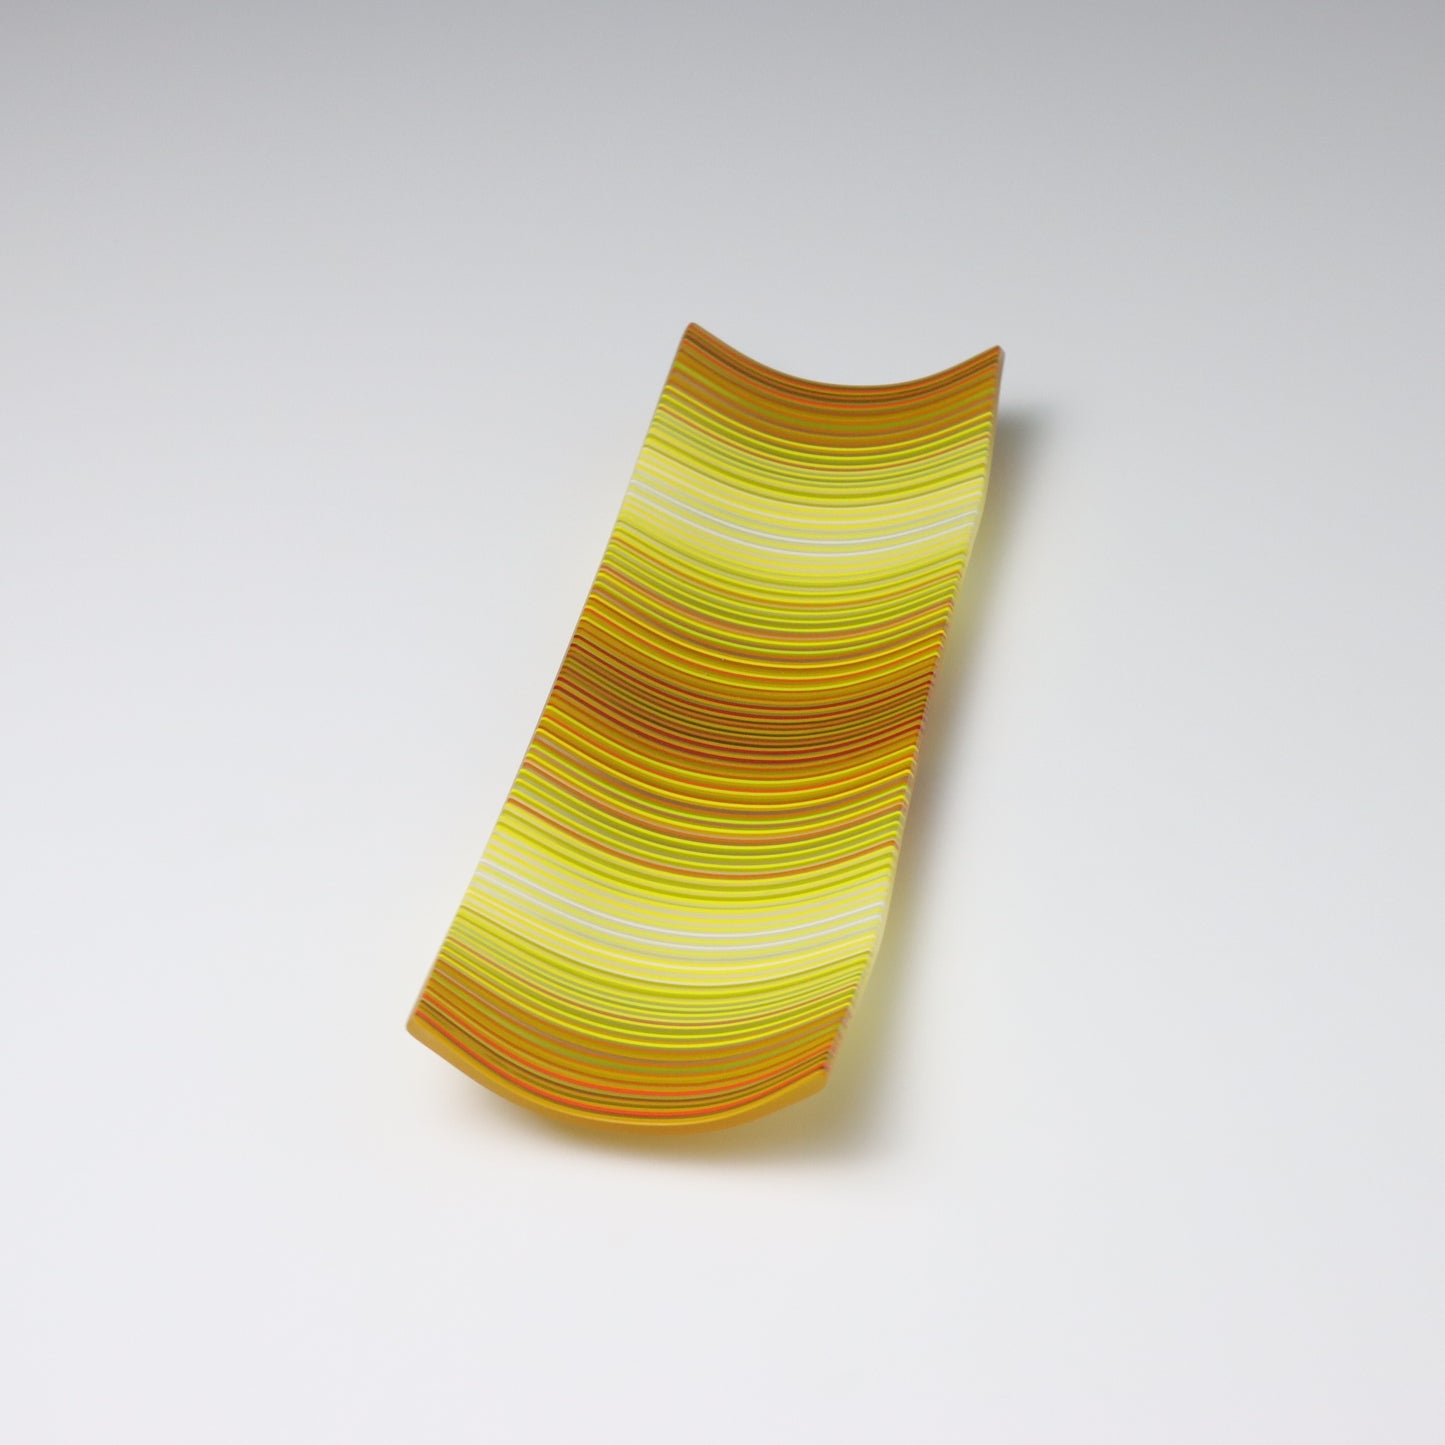 S2120 | Rectangular Shaped ColourWave Glass Plate | Golden Brown and Yellow